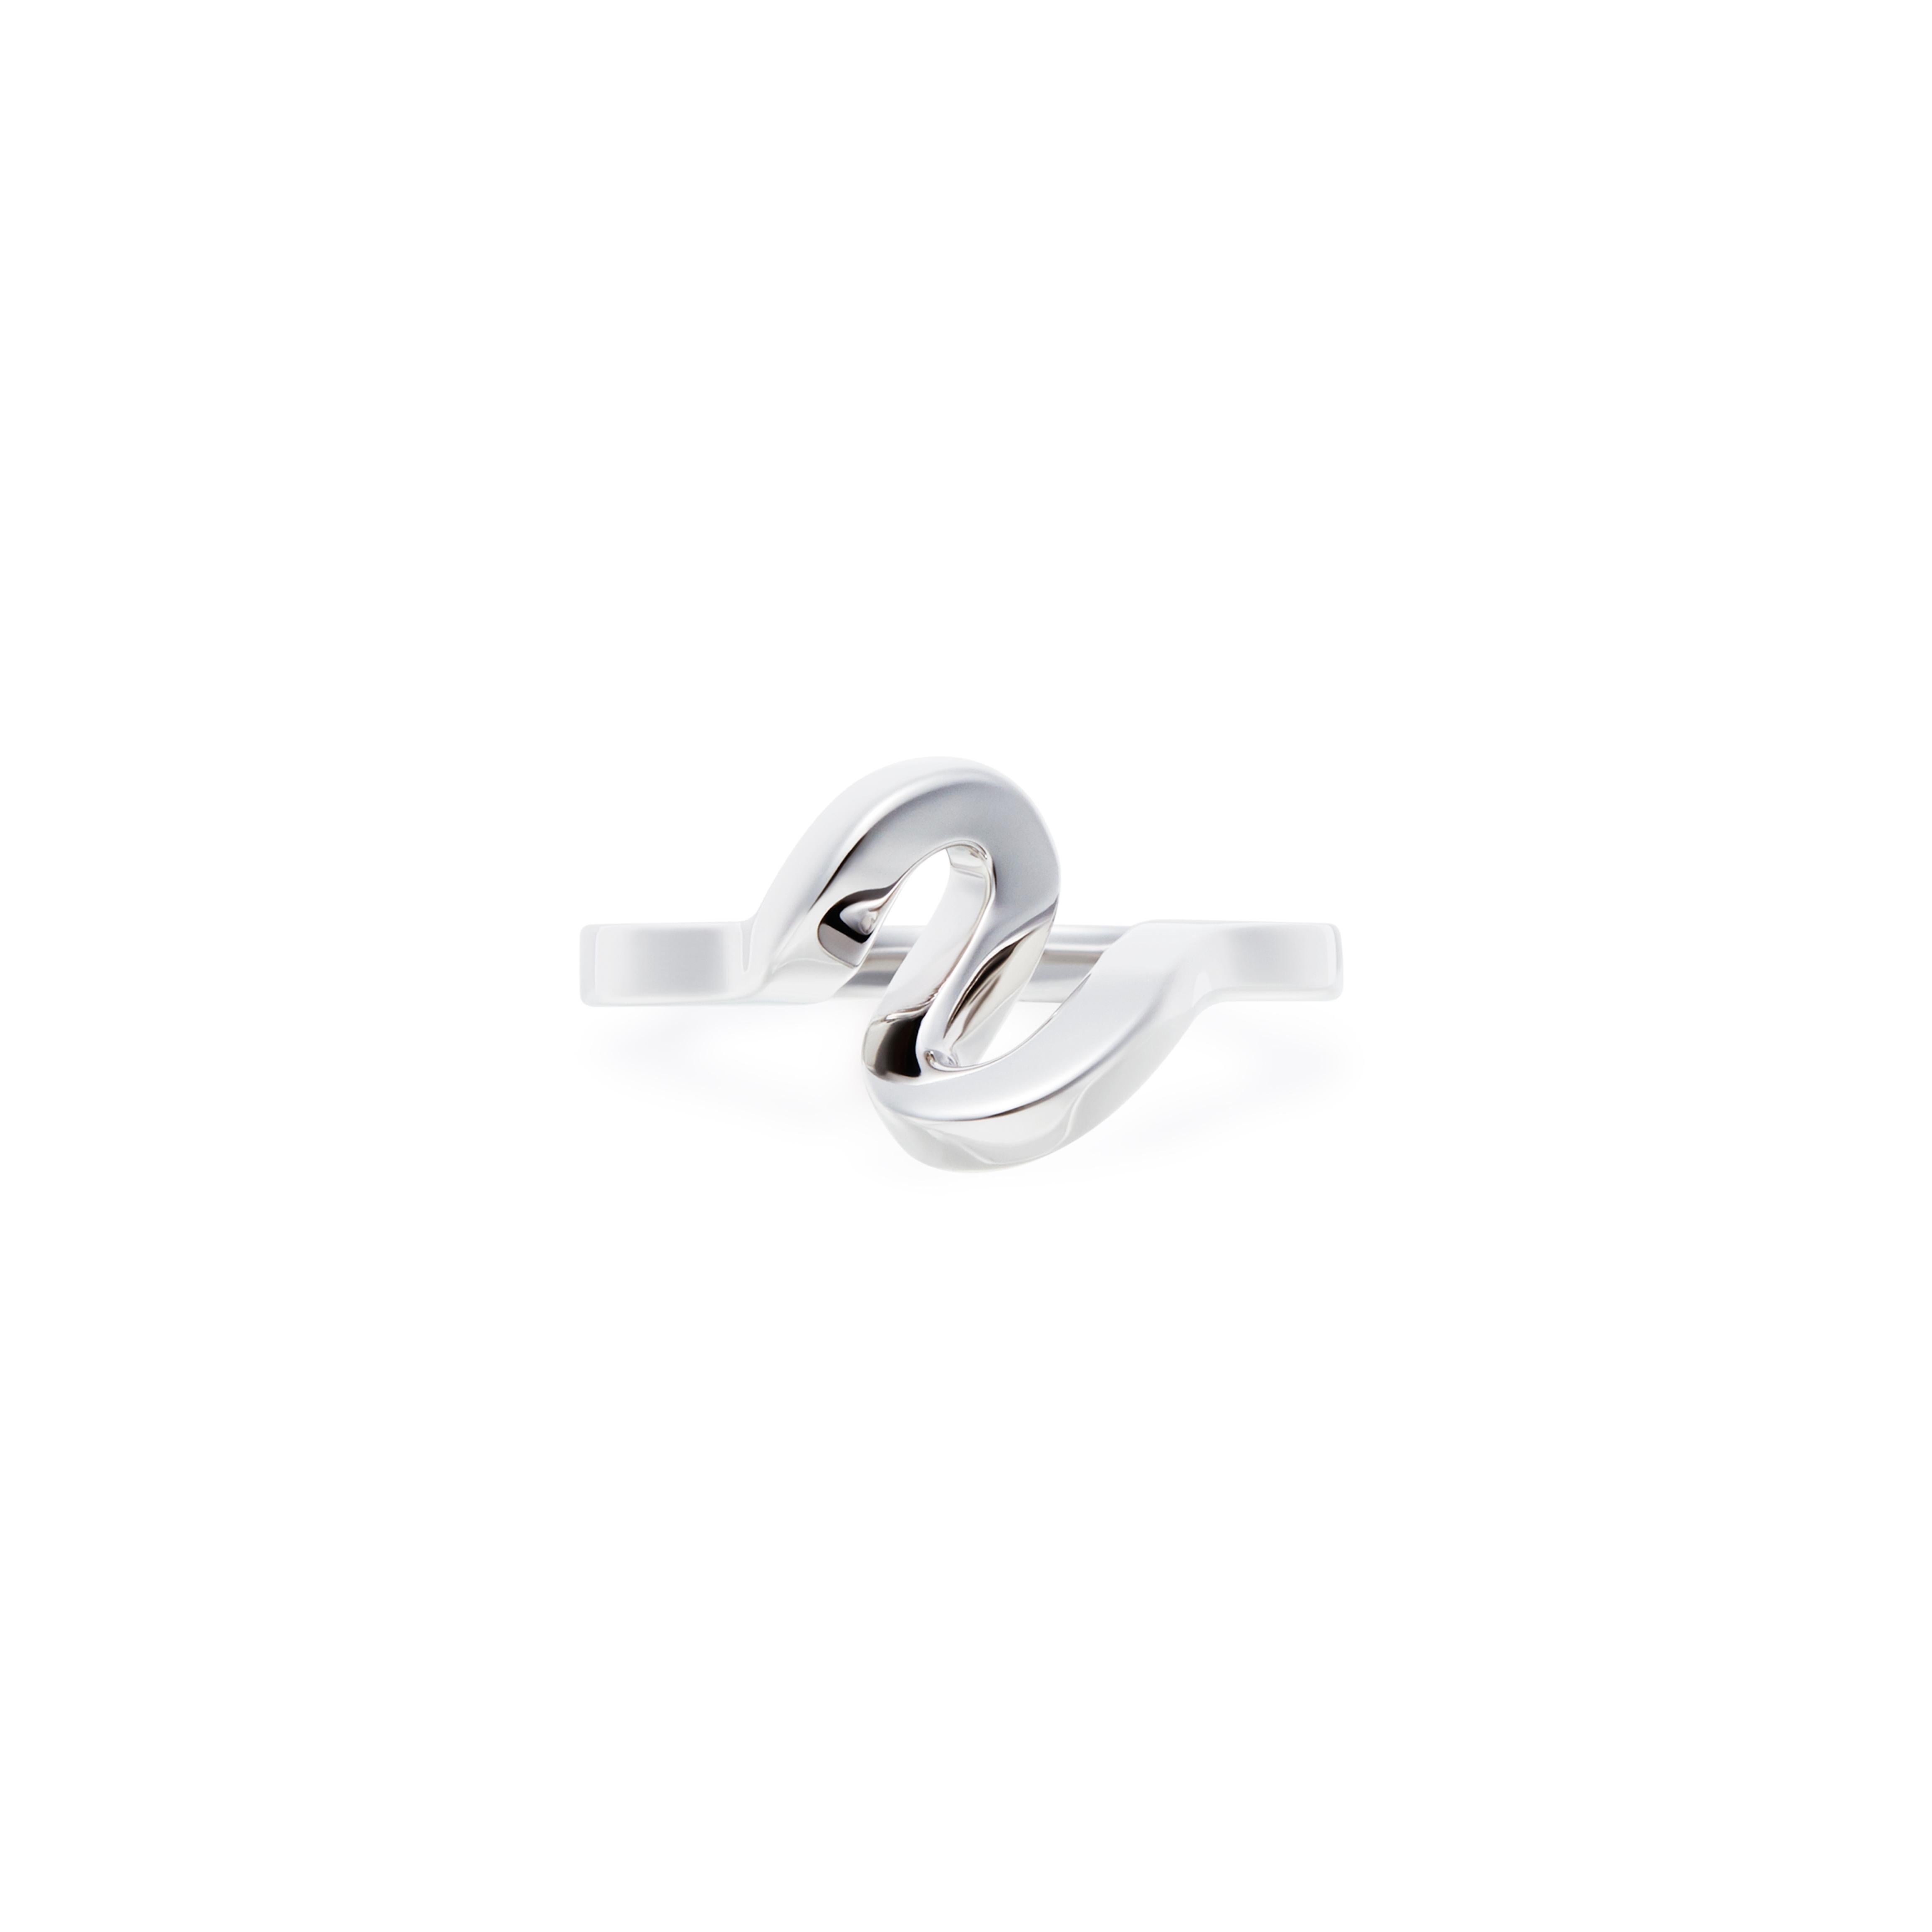 The interstellar ring is from the Nova 01 collection inspired by the supernova. Energetic in its design with a sleek and modern twist. Multiple sizes available